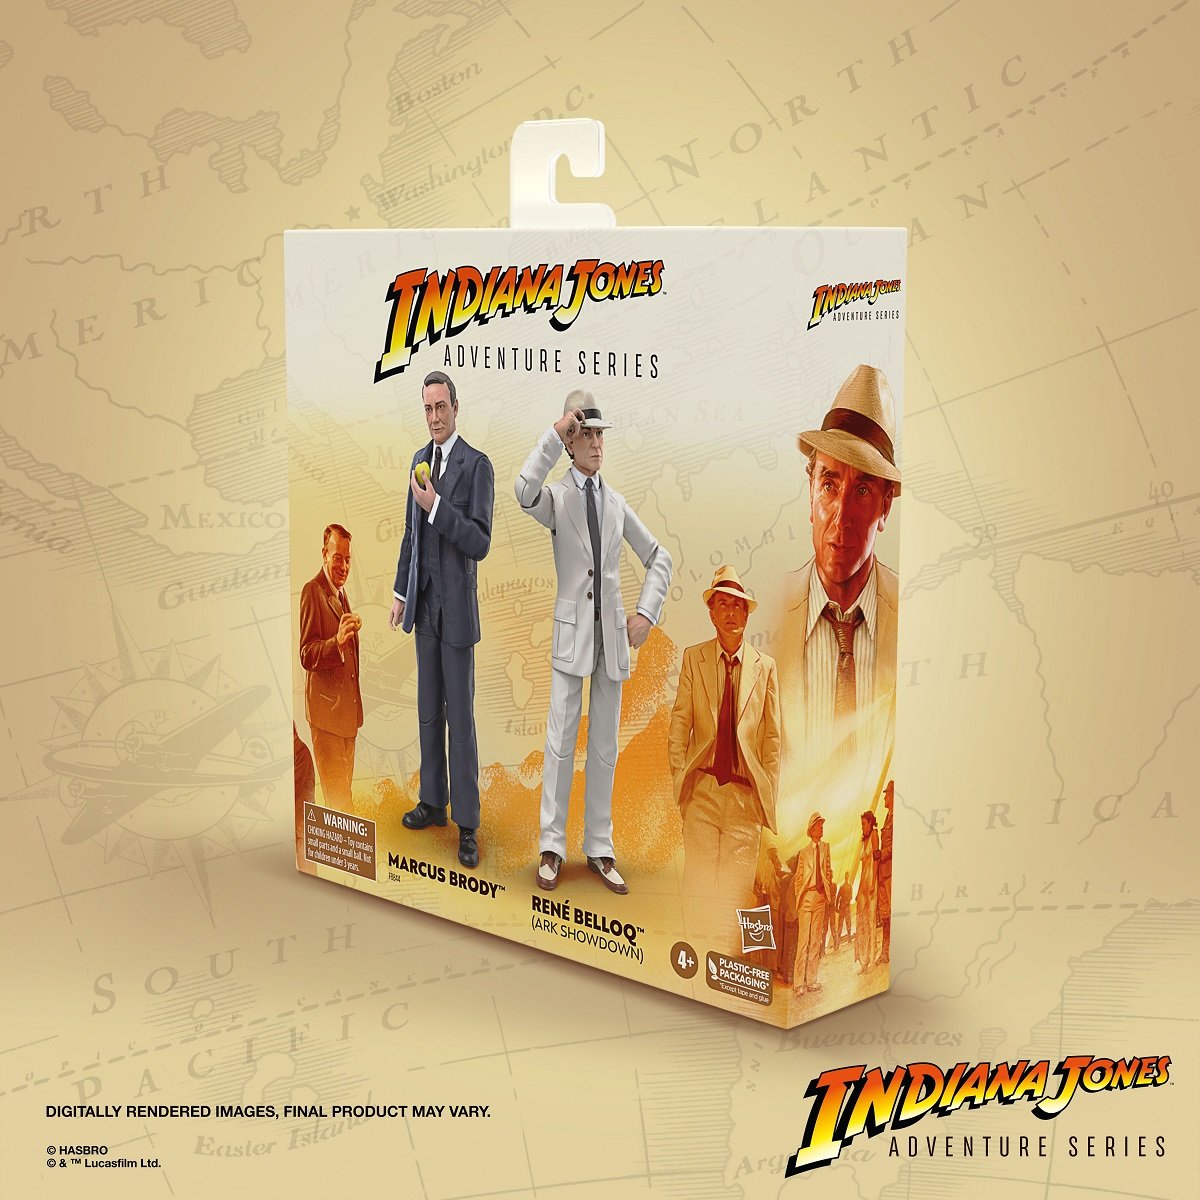 Indiana Jones Adventure Series from Hasbro, Brody and Beloq 2 pack packaging side view. 